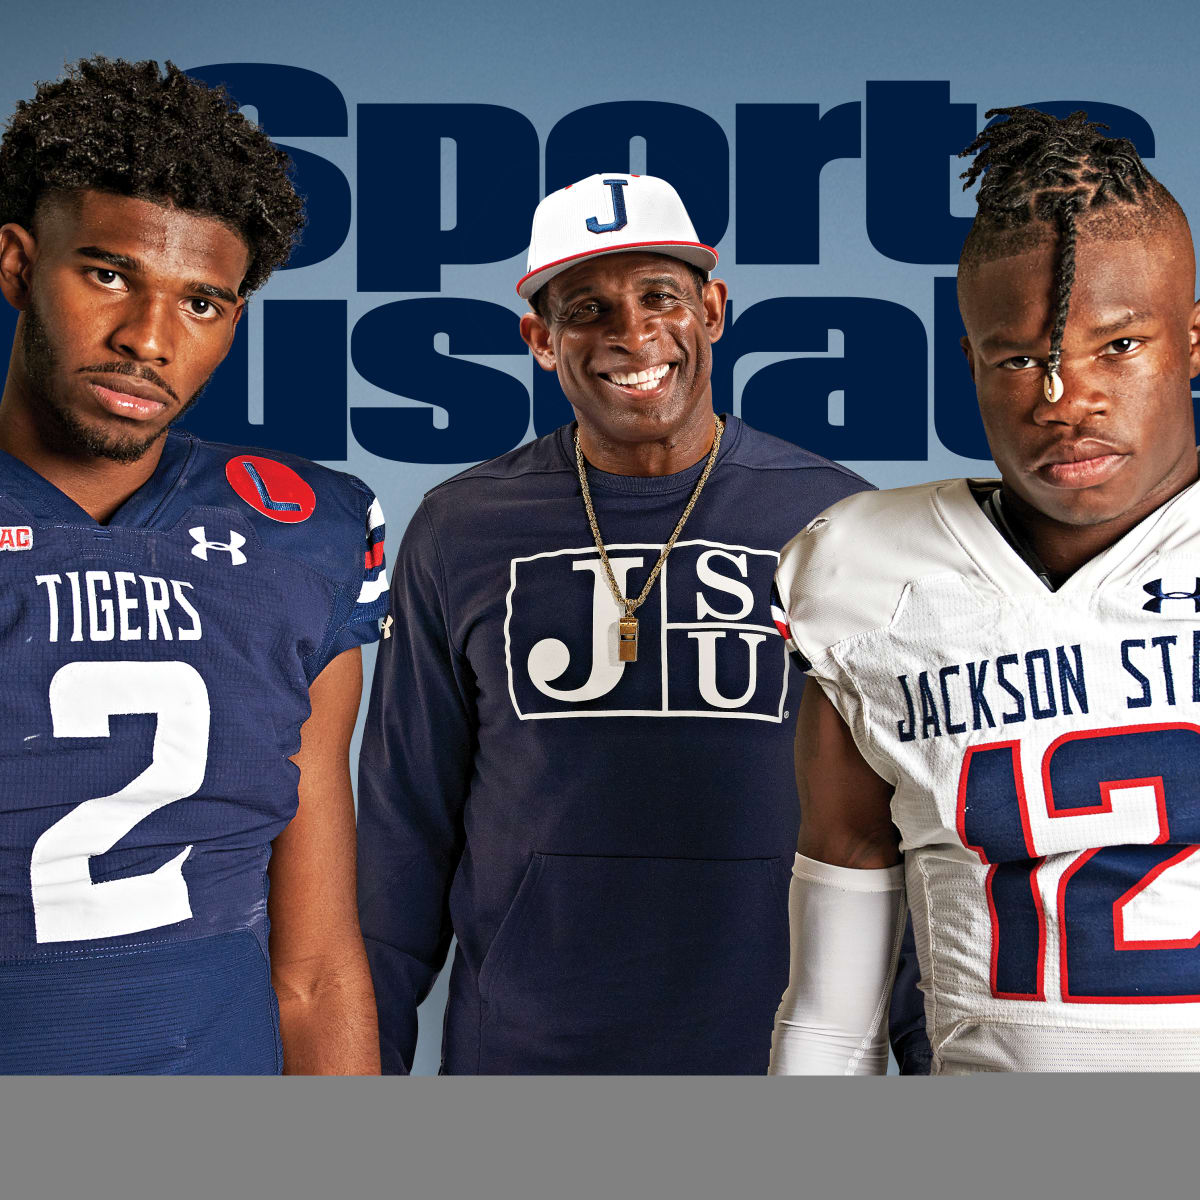 Deion Sanders Graces Sports Illustrated Cover W/ Some Of His HBCU